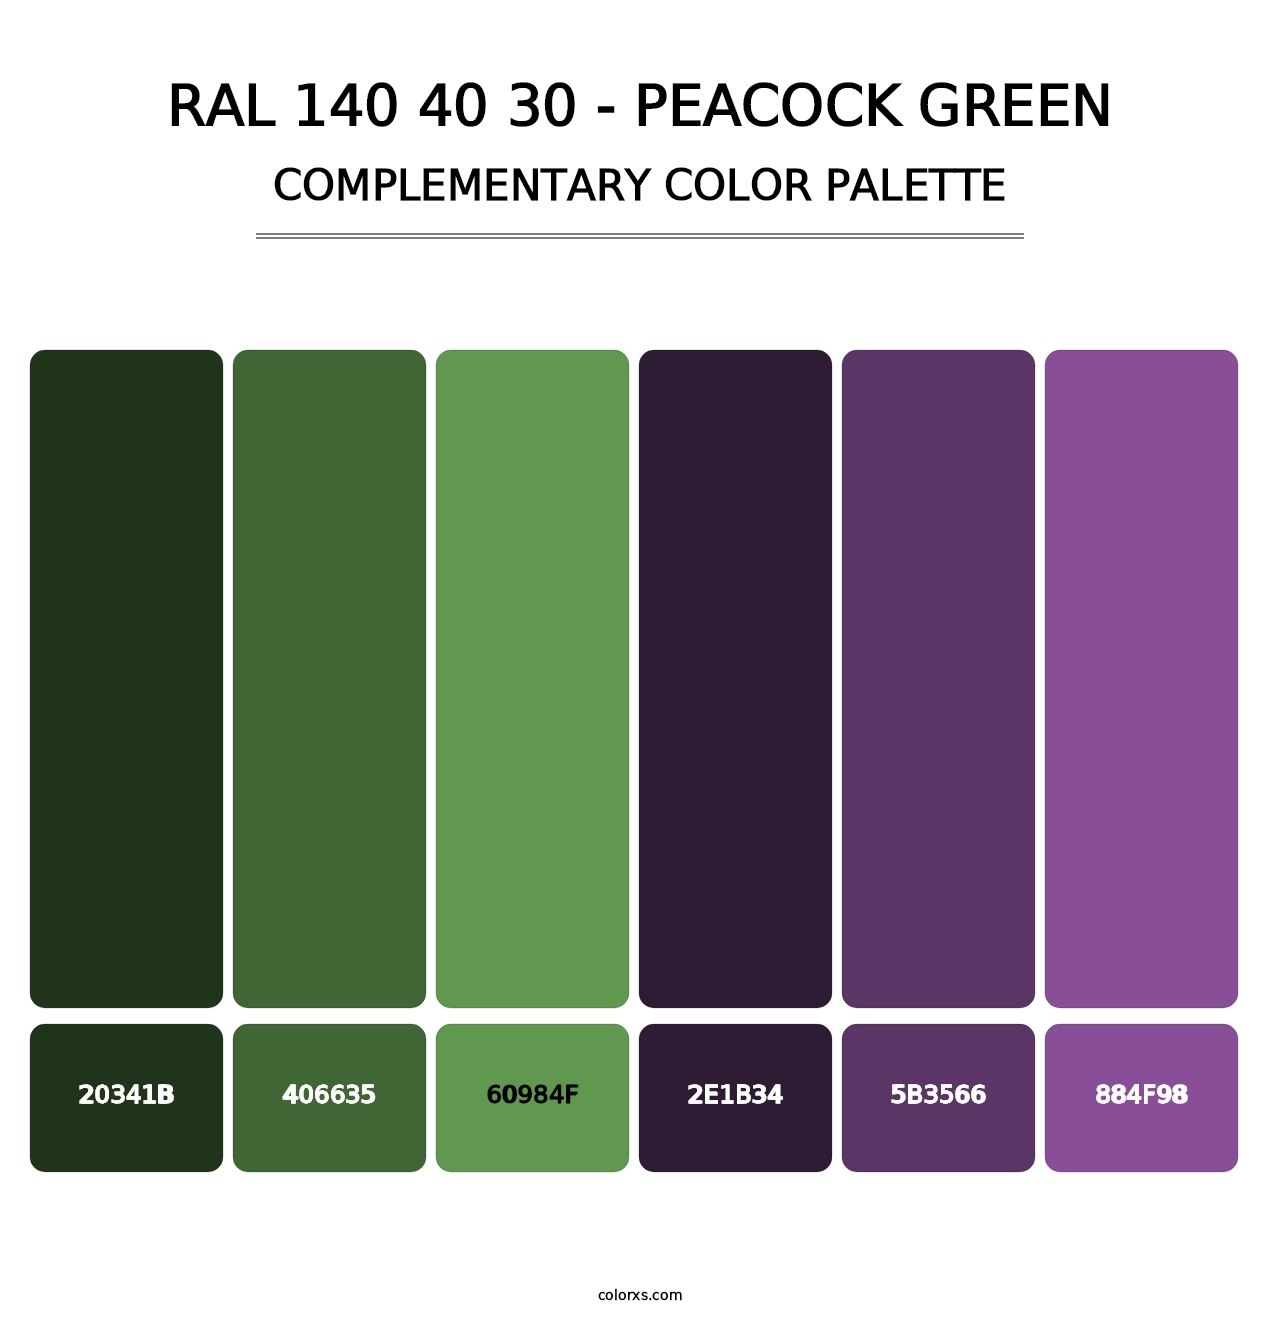 RAL 140 40 30 - Peacock Green - Complementary Color Palette